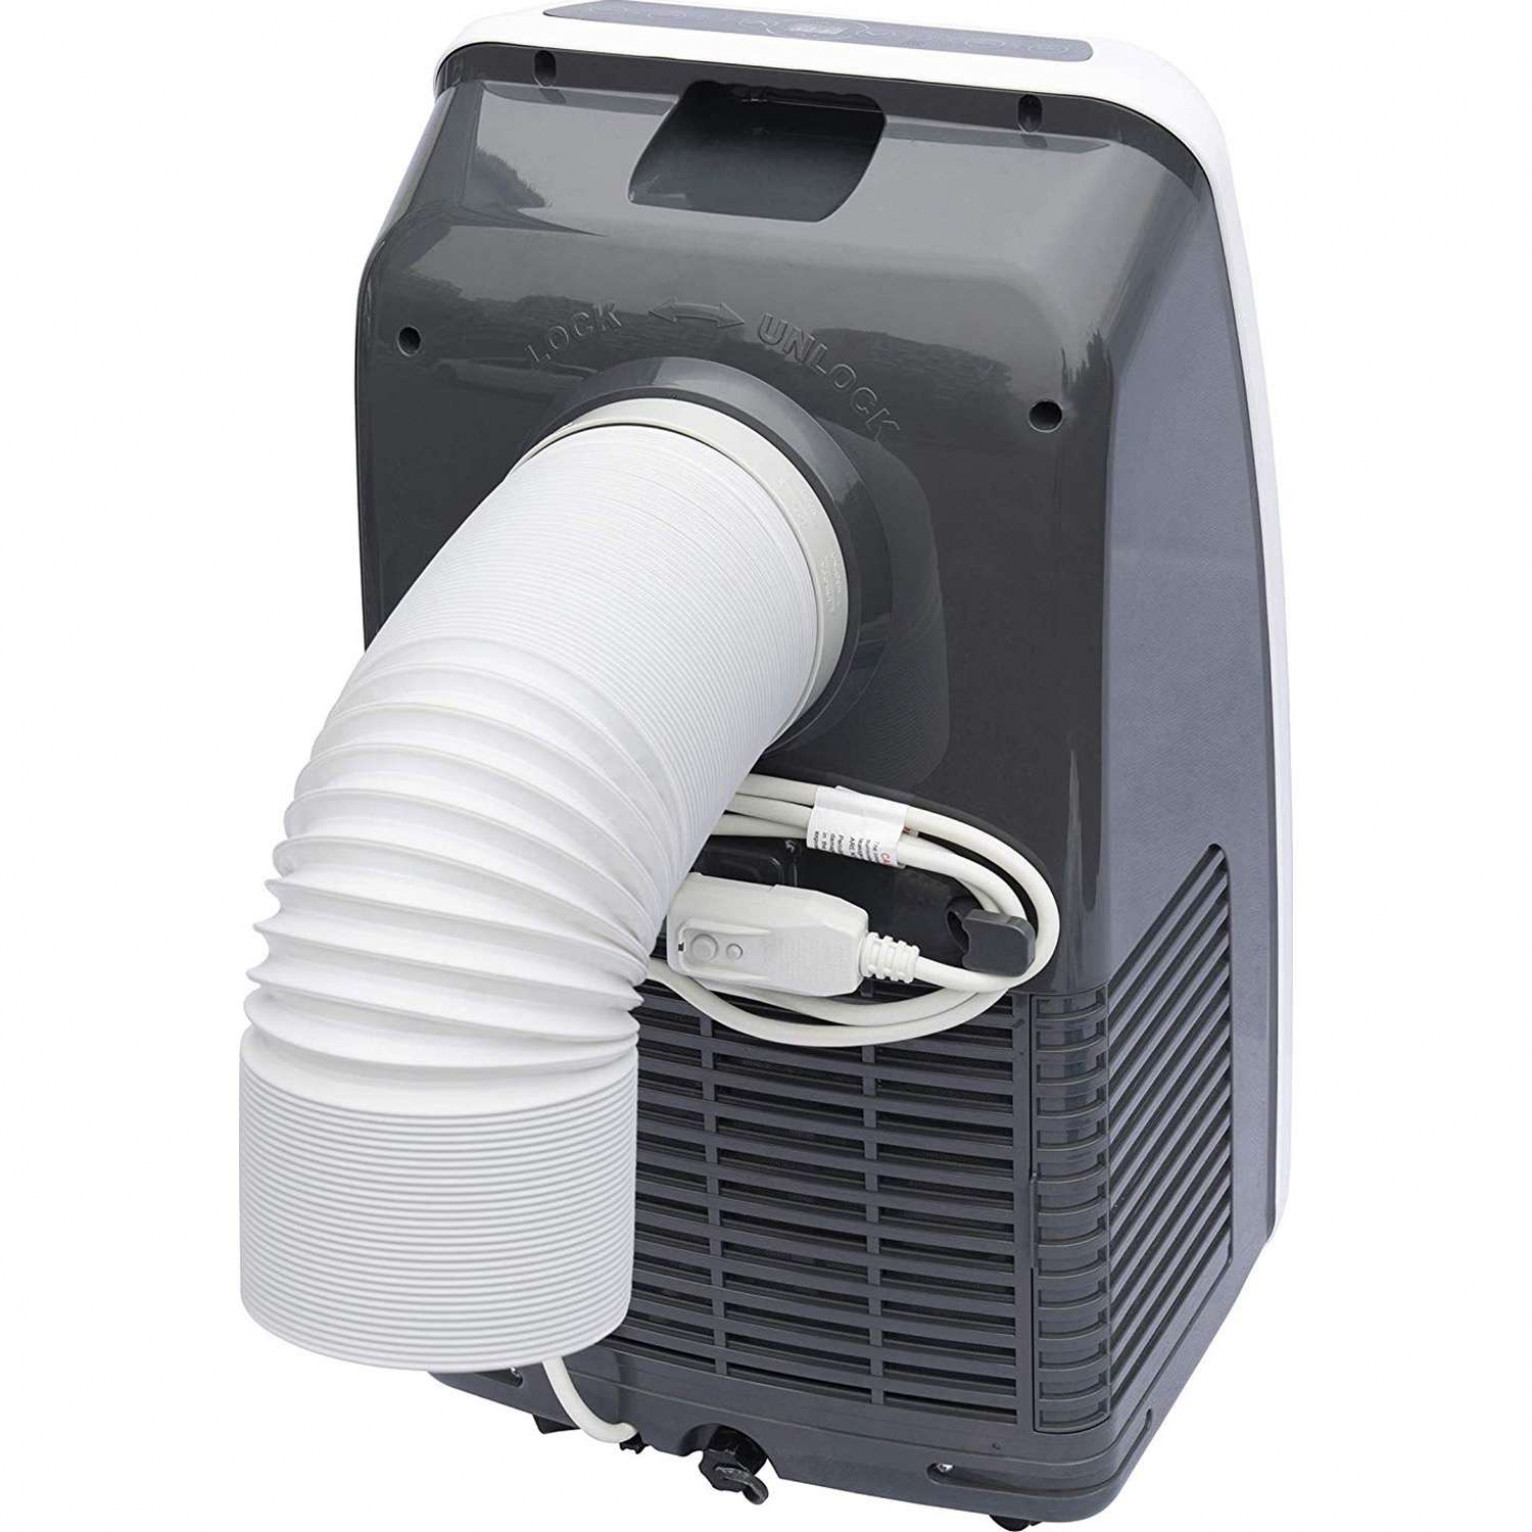 Portable Ac Or Swamp Cooler